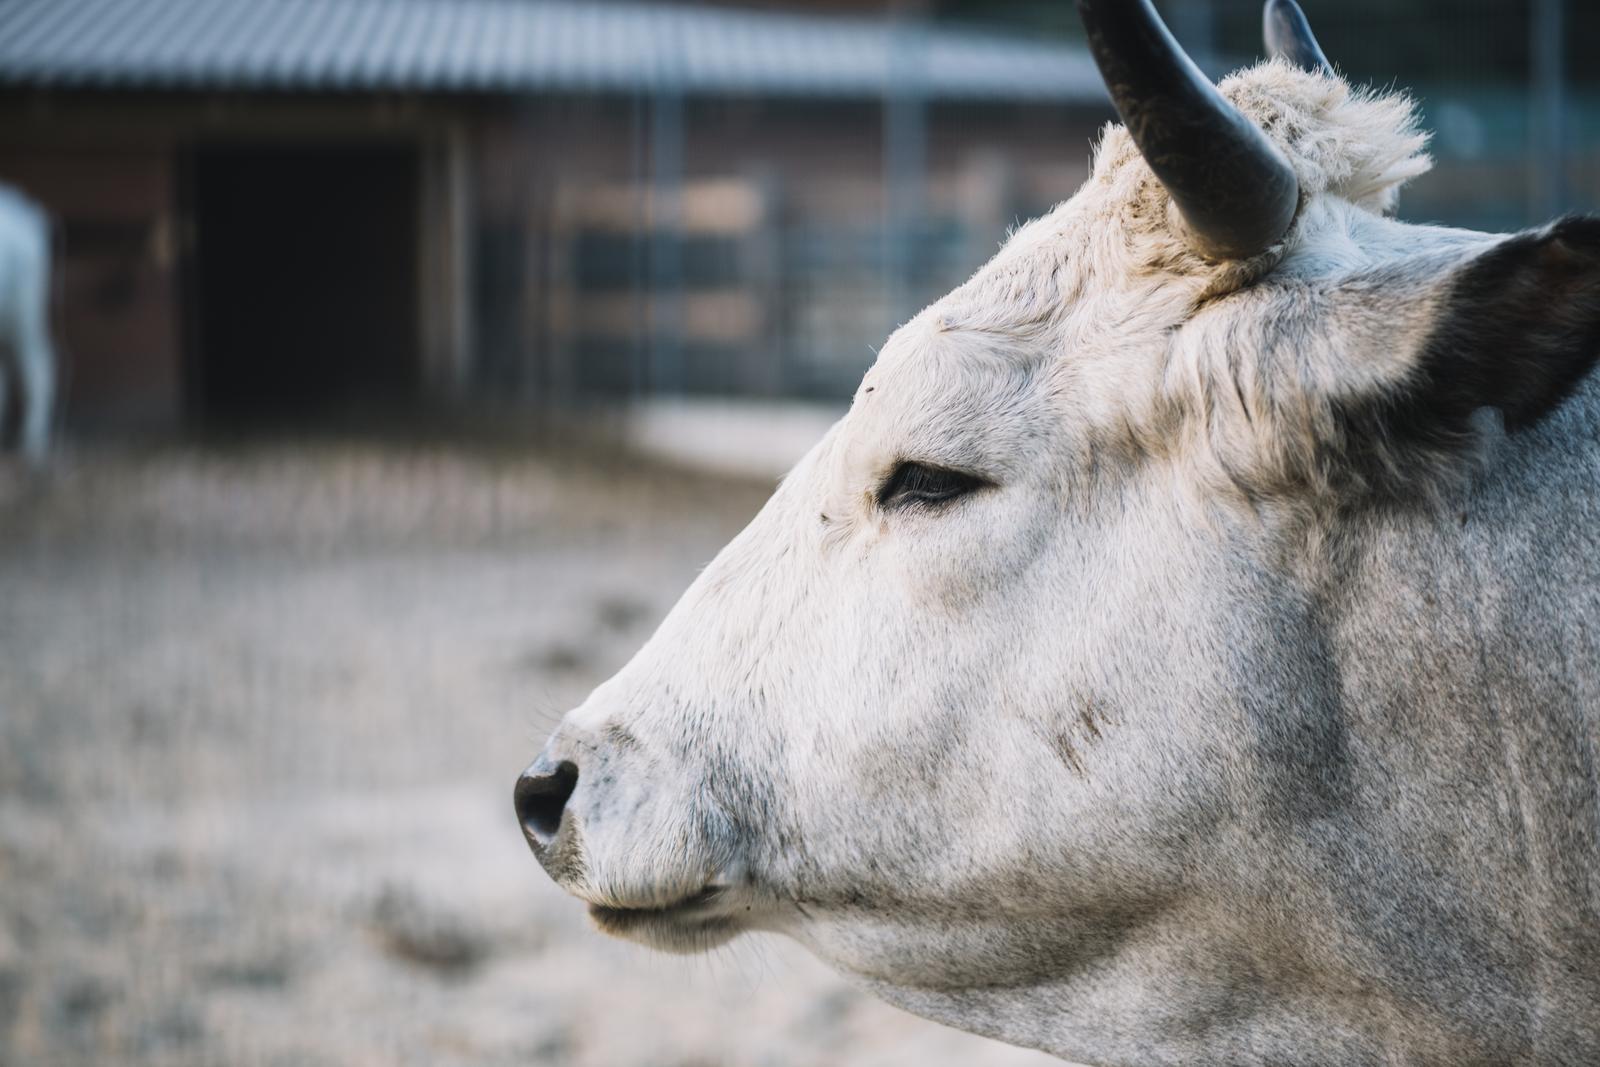 Raising of other cattle and buffaloes in Viljandi county